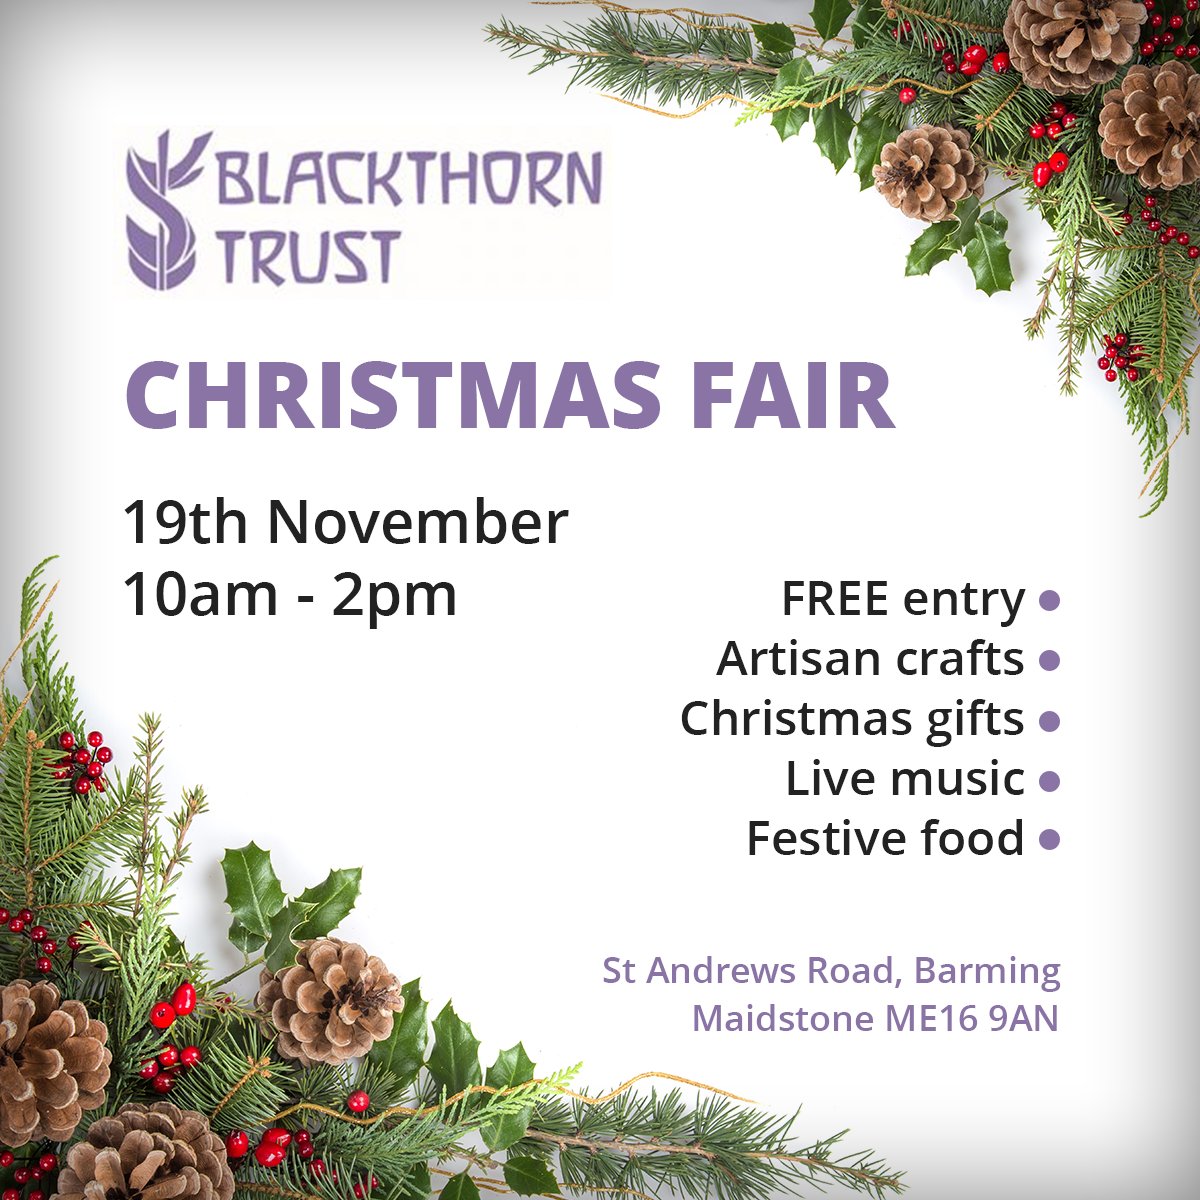 We love supporting local events in Maidstone. With Christmas around the corner, why not check out the annual Blackthorn Trust Christmas Fair! Find out more on their Facebook Event page here: facebook.com/events/3384019…